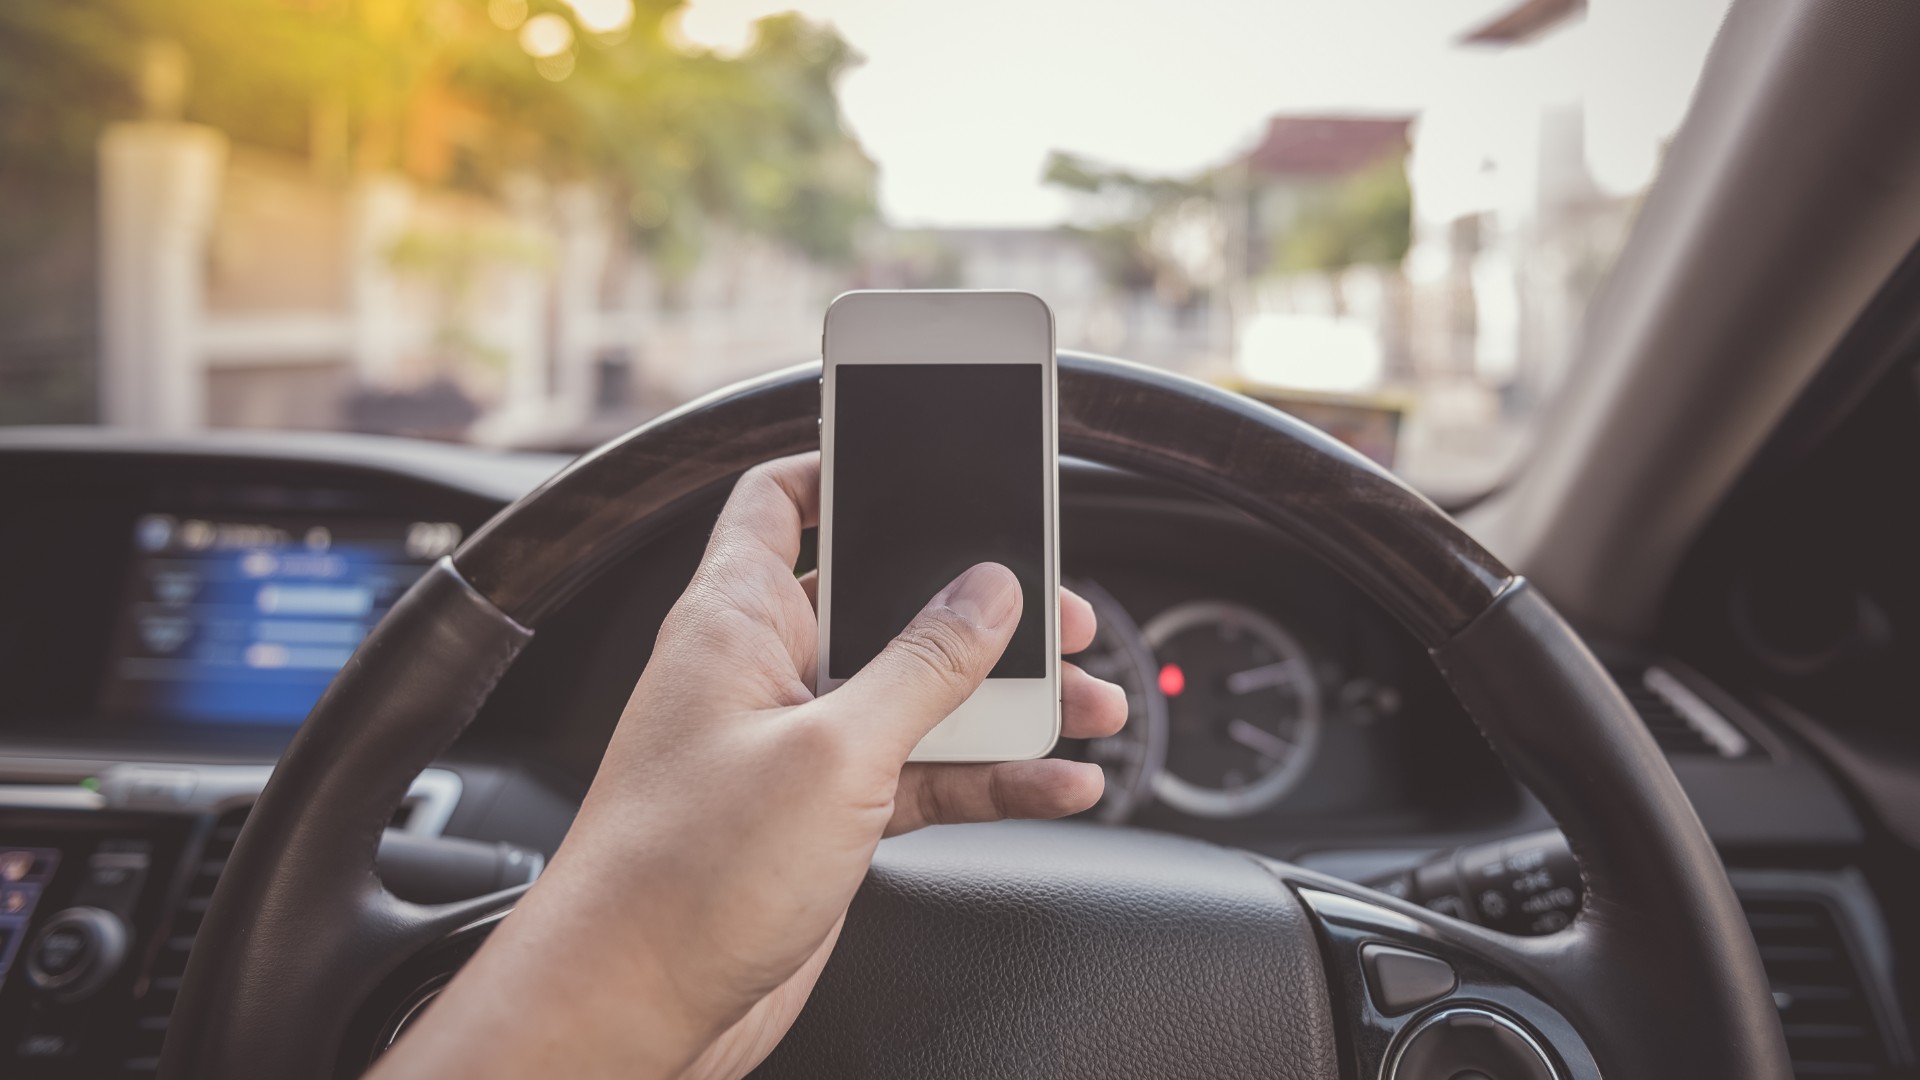 Calls for increased penalties for using phone while driving